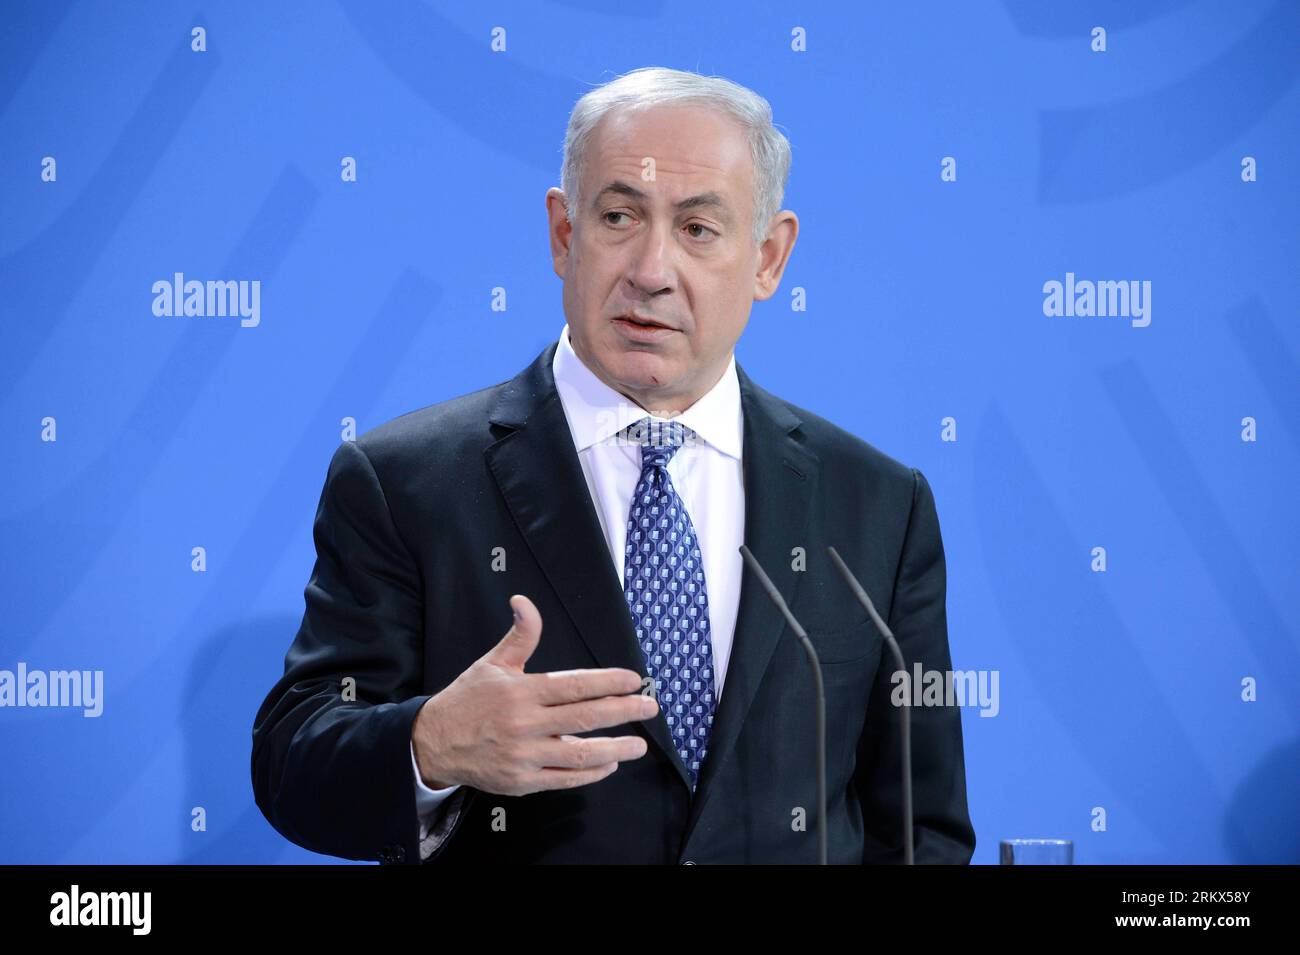 Bildnummer: 58891166  Datum: 06.12.2012  Copyright: imago/Xinhua (121206) -- BERLIN, Dec. 6, 2012 (Xinhua) -- Israeli Prime Minister Benjamin Netanyahu attends a joint press conference with German Chancellor Angela Merkel (not in the picture) after their meeting in Berlin, Germany, Dec. 6, 2012. Germany and Israel said on Thursday that their special and strategic relations could hardly be affected by their differences over the new Jewish settlement plans. (Xinhua/Goncalo Silva) GERMANY-ISRAEL-DIPLOMACY-JEWISH SETTLEMENT-PLANS PUBLICATIONxNOTxINxCHN People Politik PK Pressetermin Porträt Regier Stock Photo